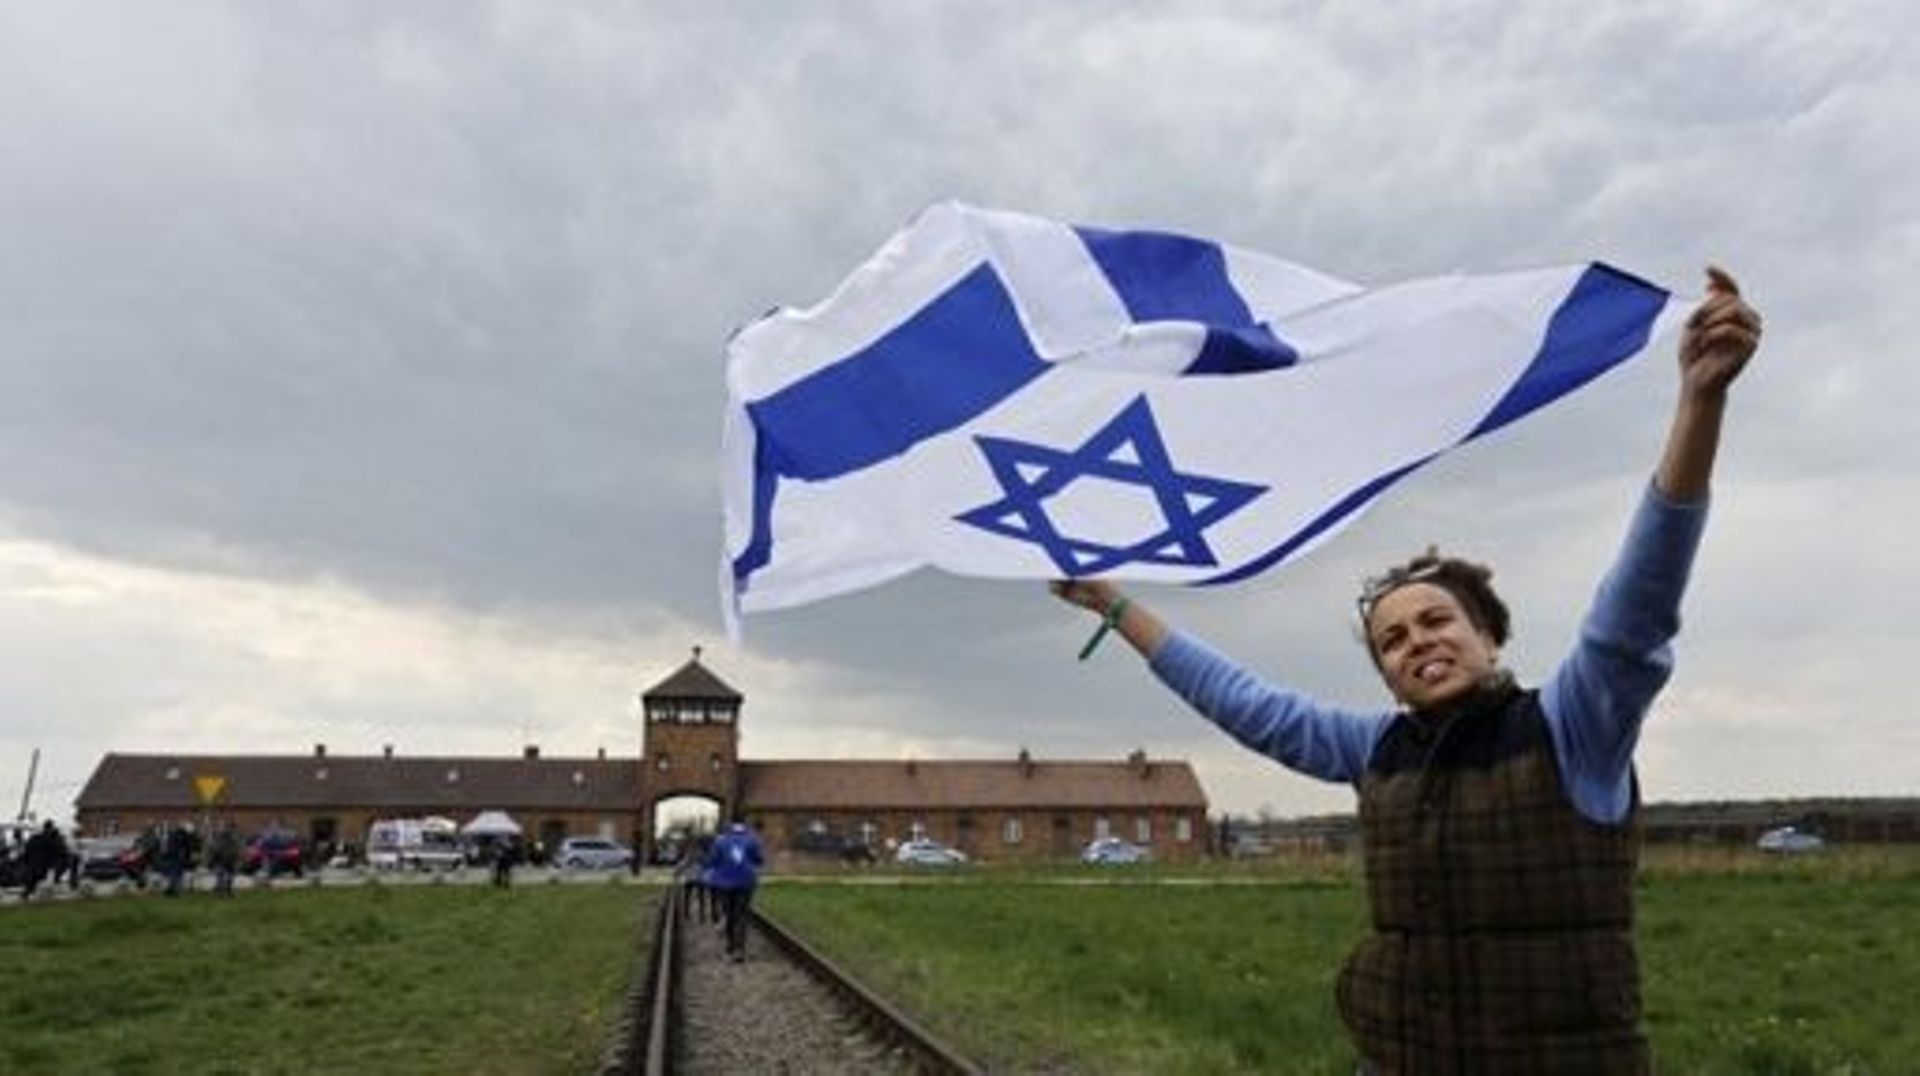 A particpant holds up the national flag of Israel on the sidelines of The March of the Living that takes places at the site of the former Auschwitz-Birkenau camp to honour the victims of the Holocaust, near the historical gate of Birkenau (Auschwitz II) n